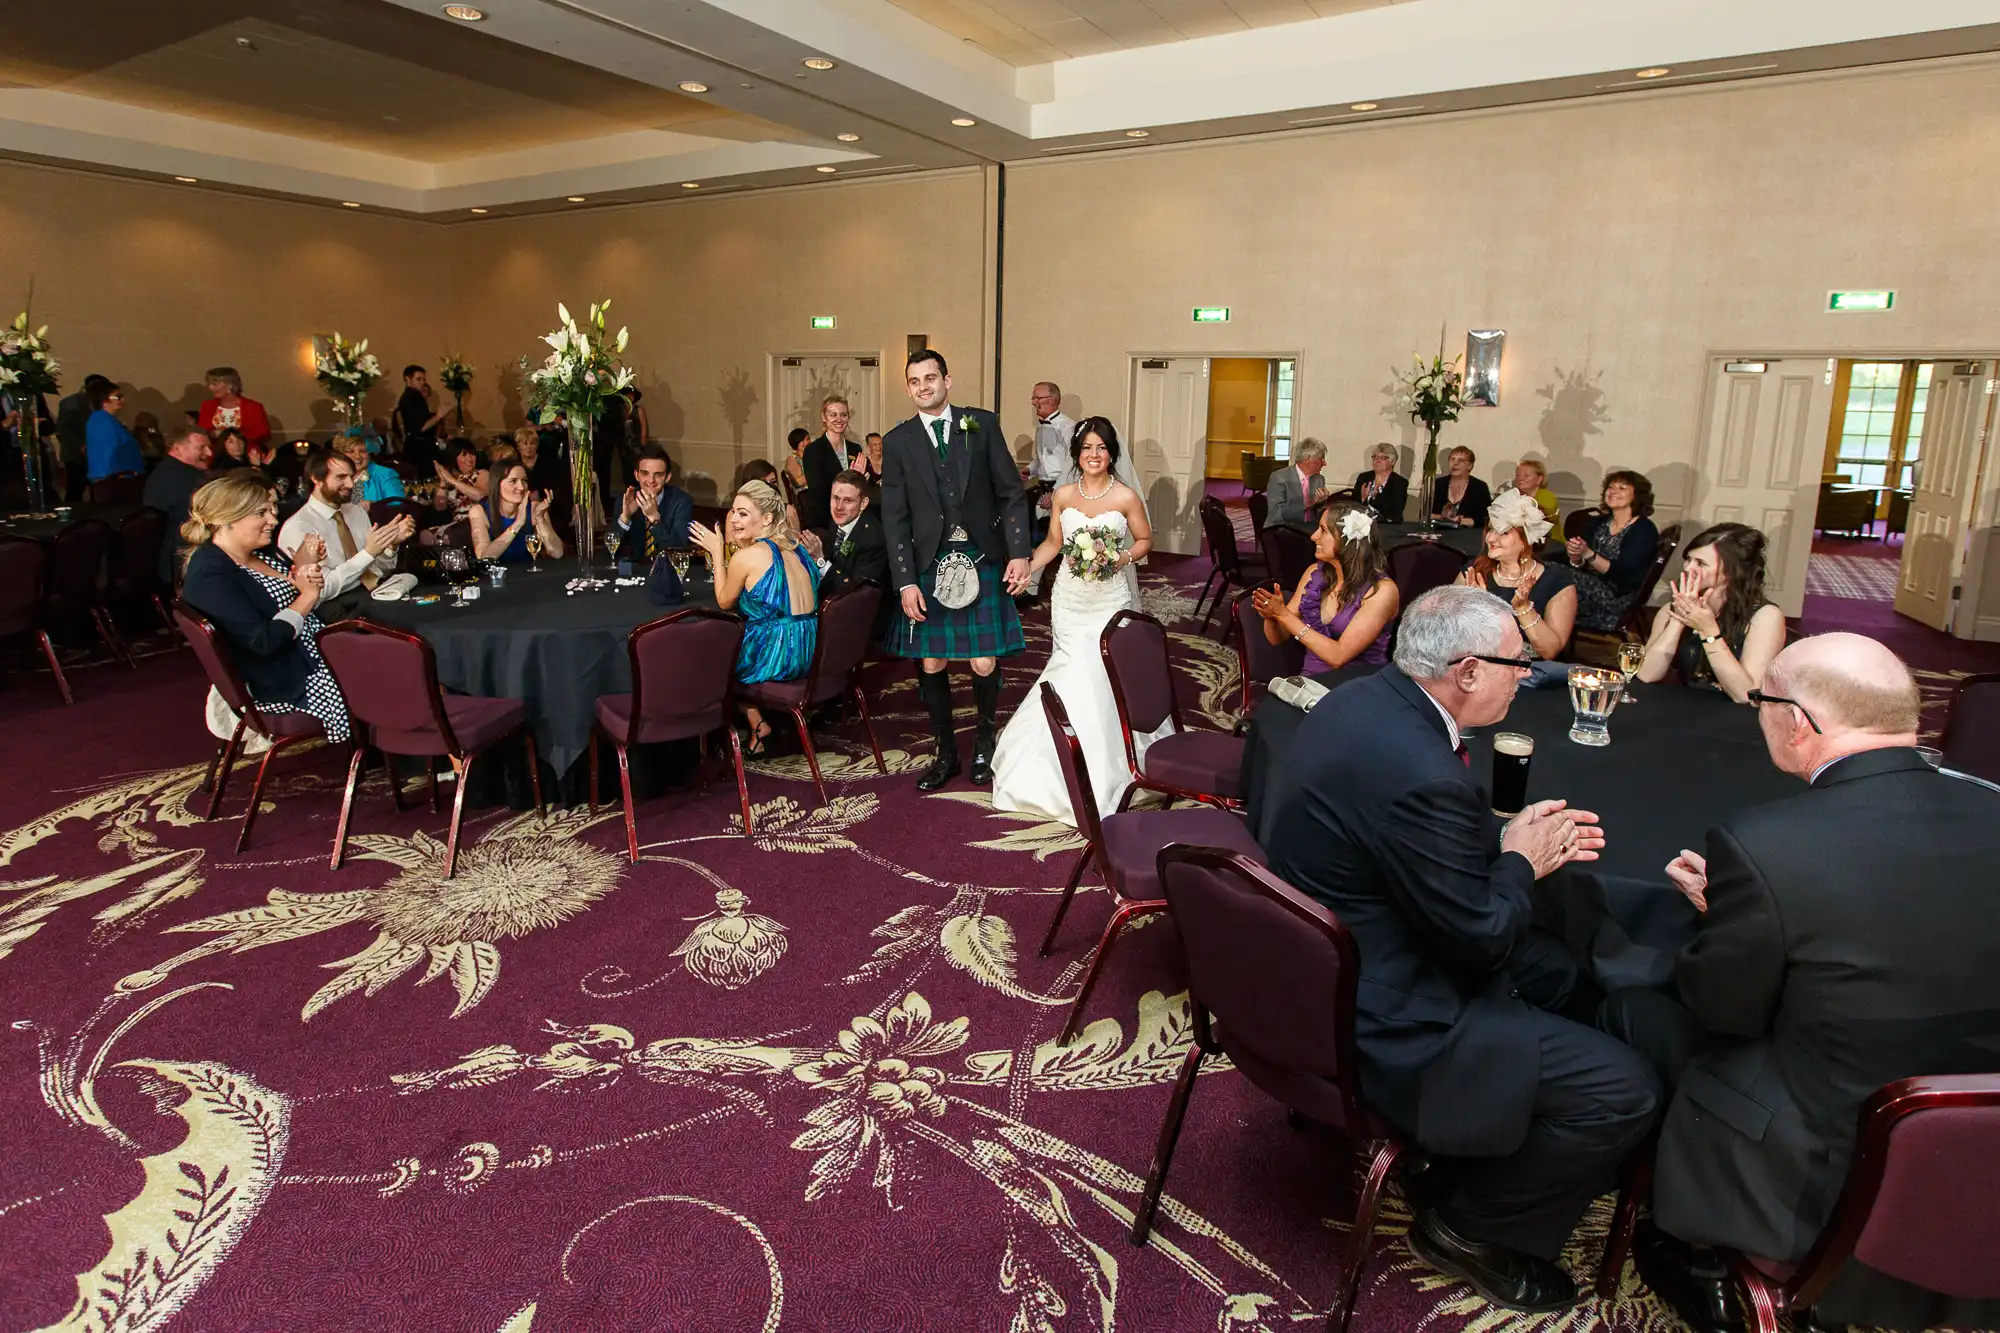 A bride and groom walking through a banquet hall as guests seated at tables applaud them.